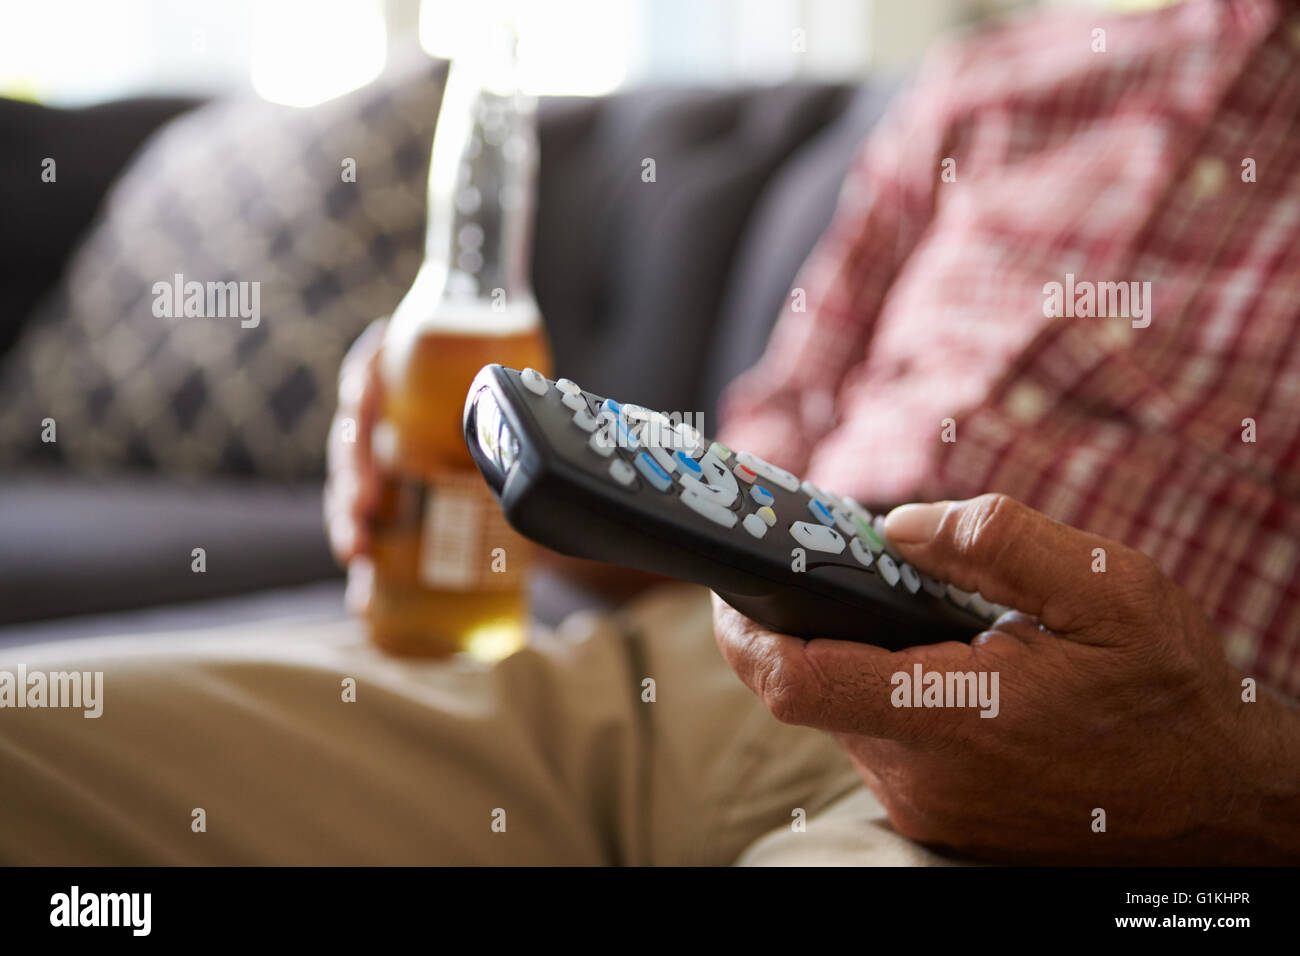 Man Sitting On Sofa Holding TV Remote And Bottle Of Beer Stock Photo